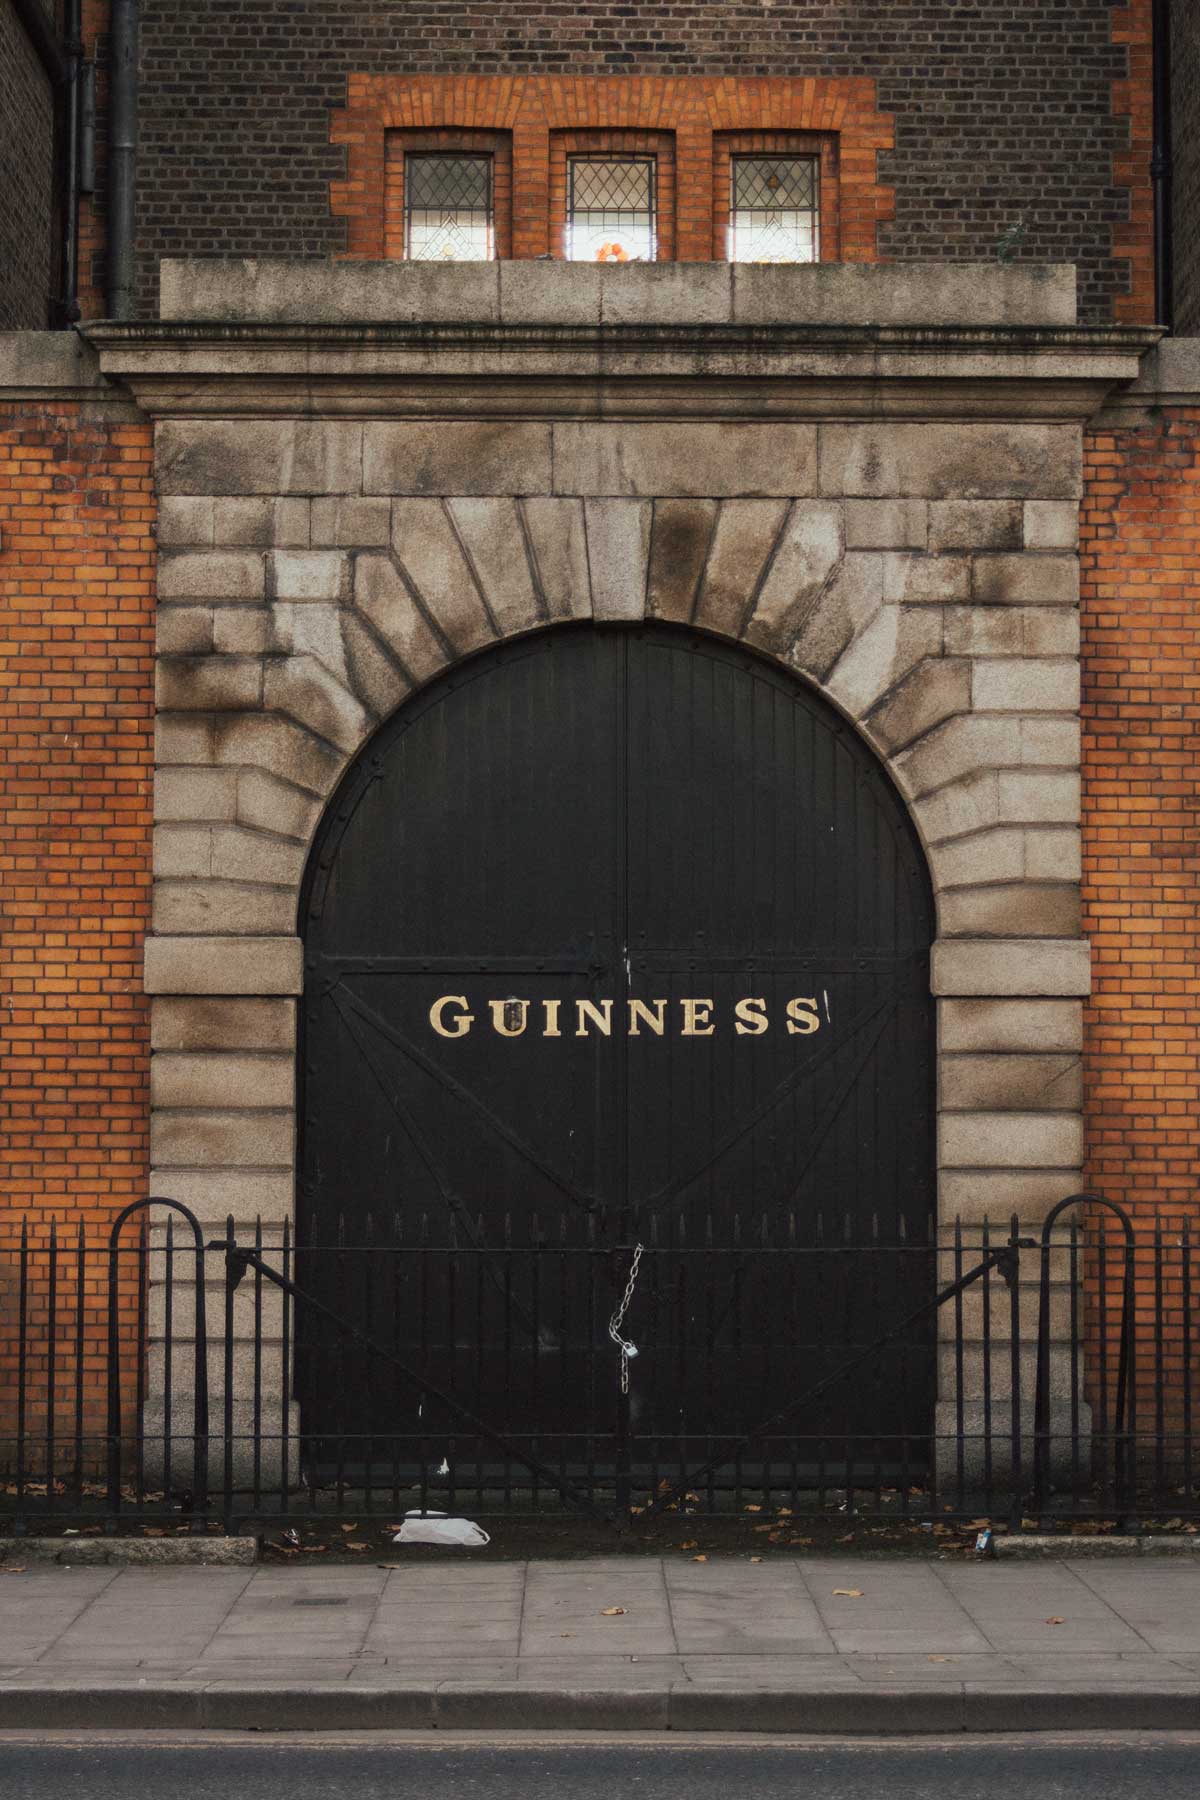 Dublin, Ireland Recommendations for the Best in European Brewing